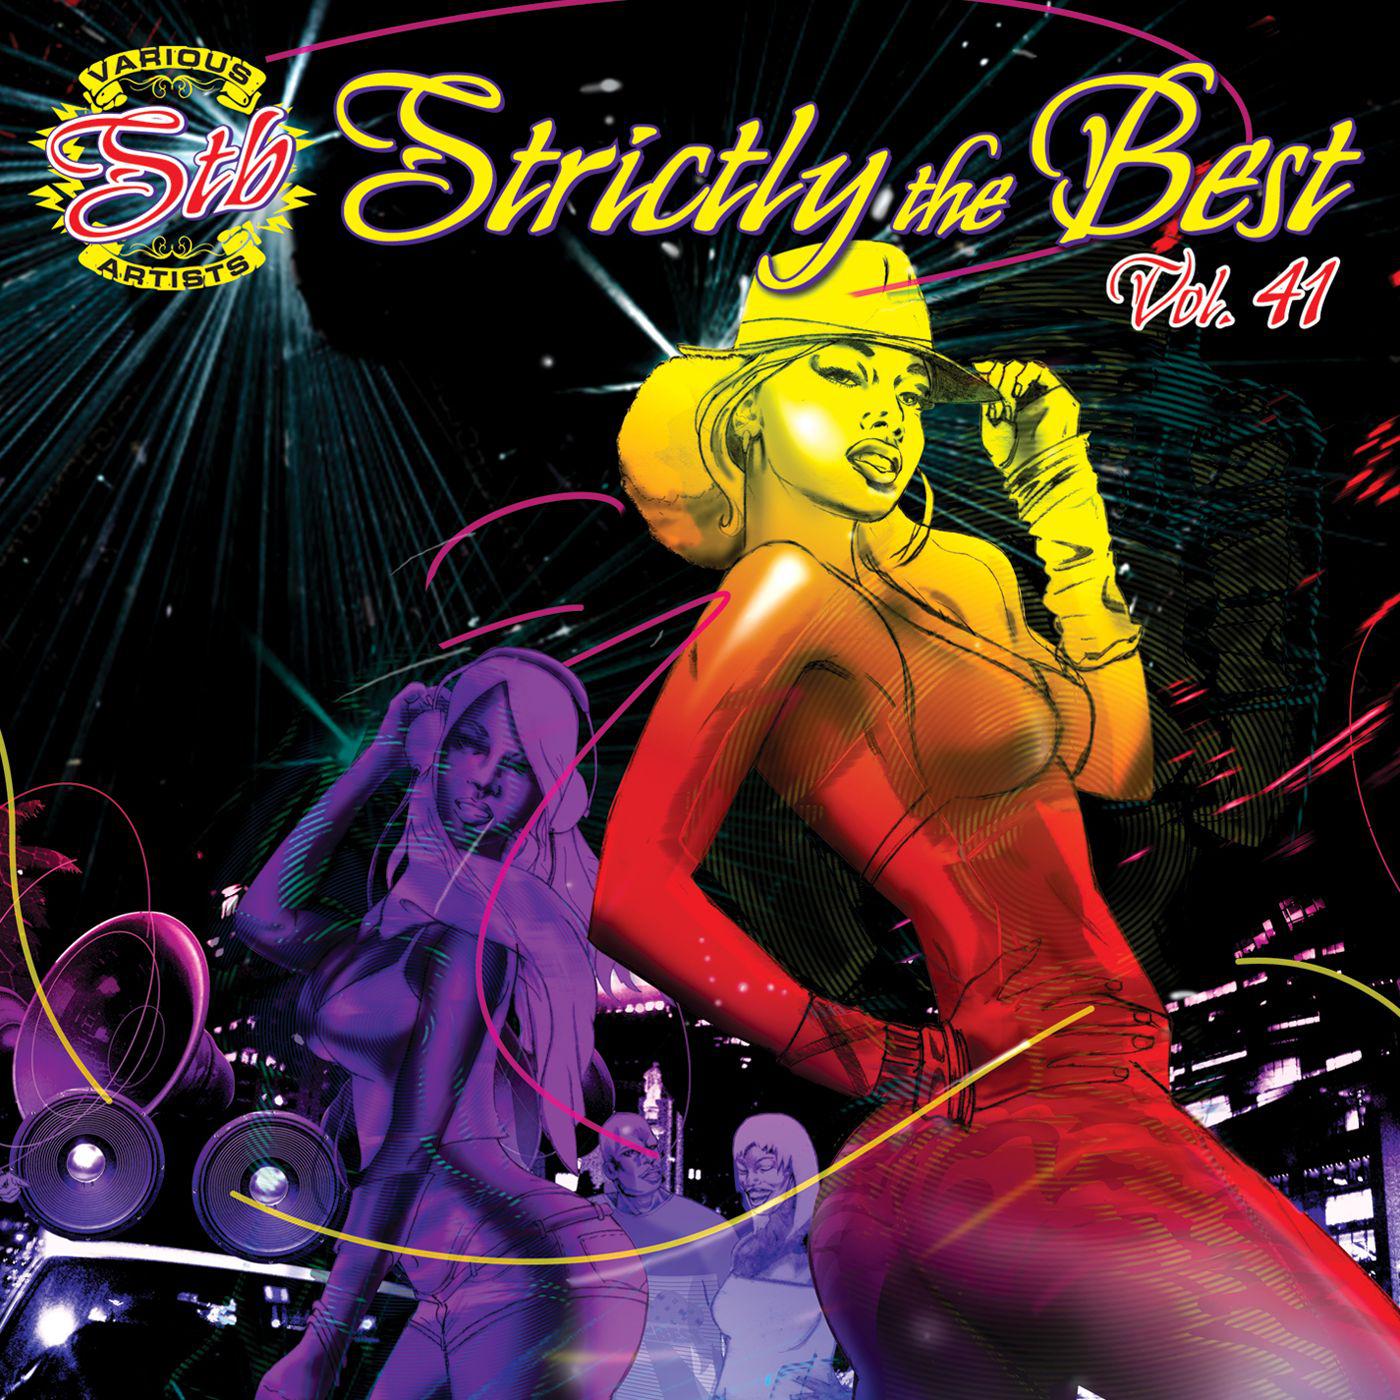 Strictly The Best Vol. 41